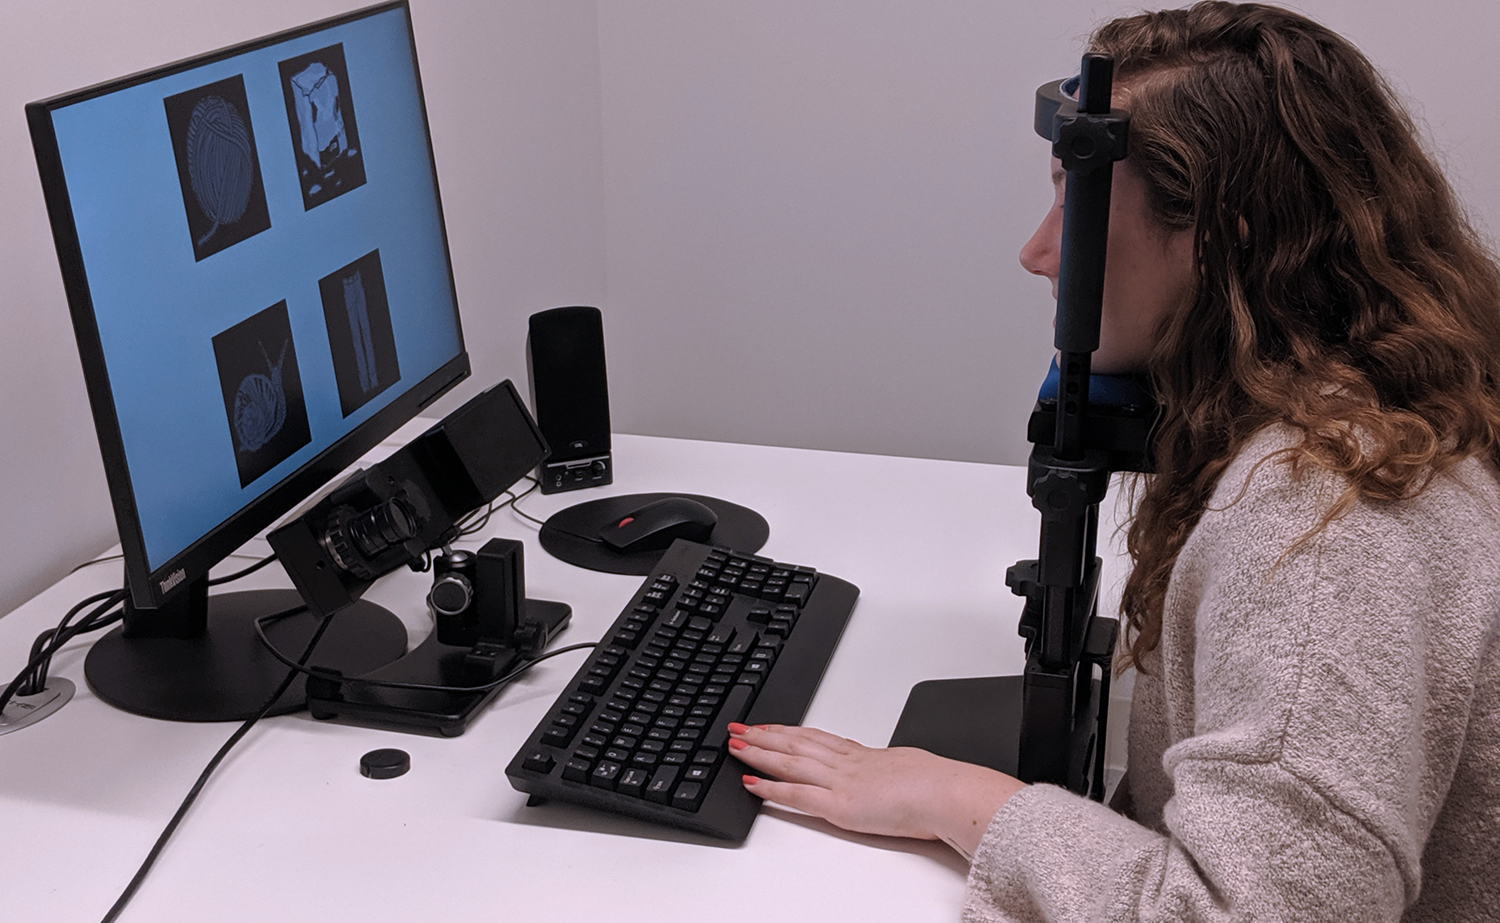 An eye-tracking experiment demonstration by ARiEAL undergraduate trainee, Paige Cater. (Photo Credit: Chia-Yu Lin)